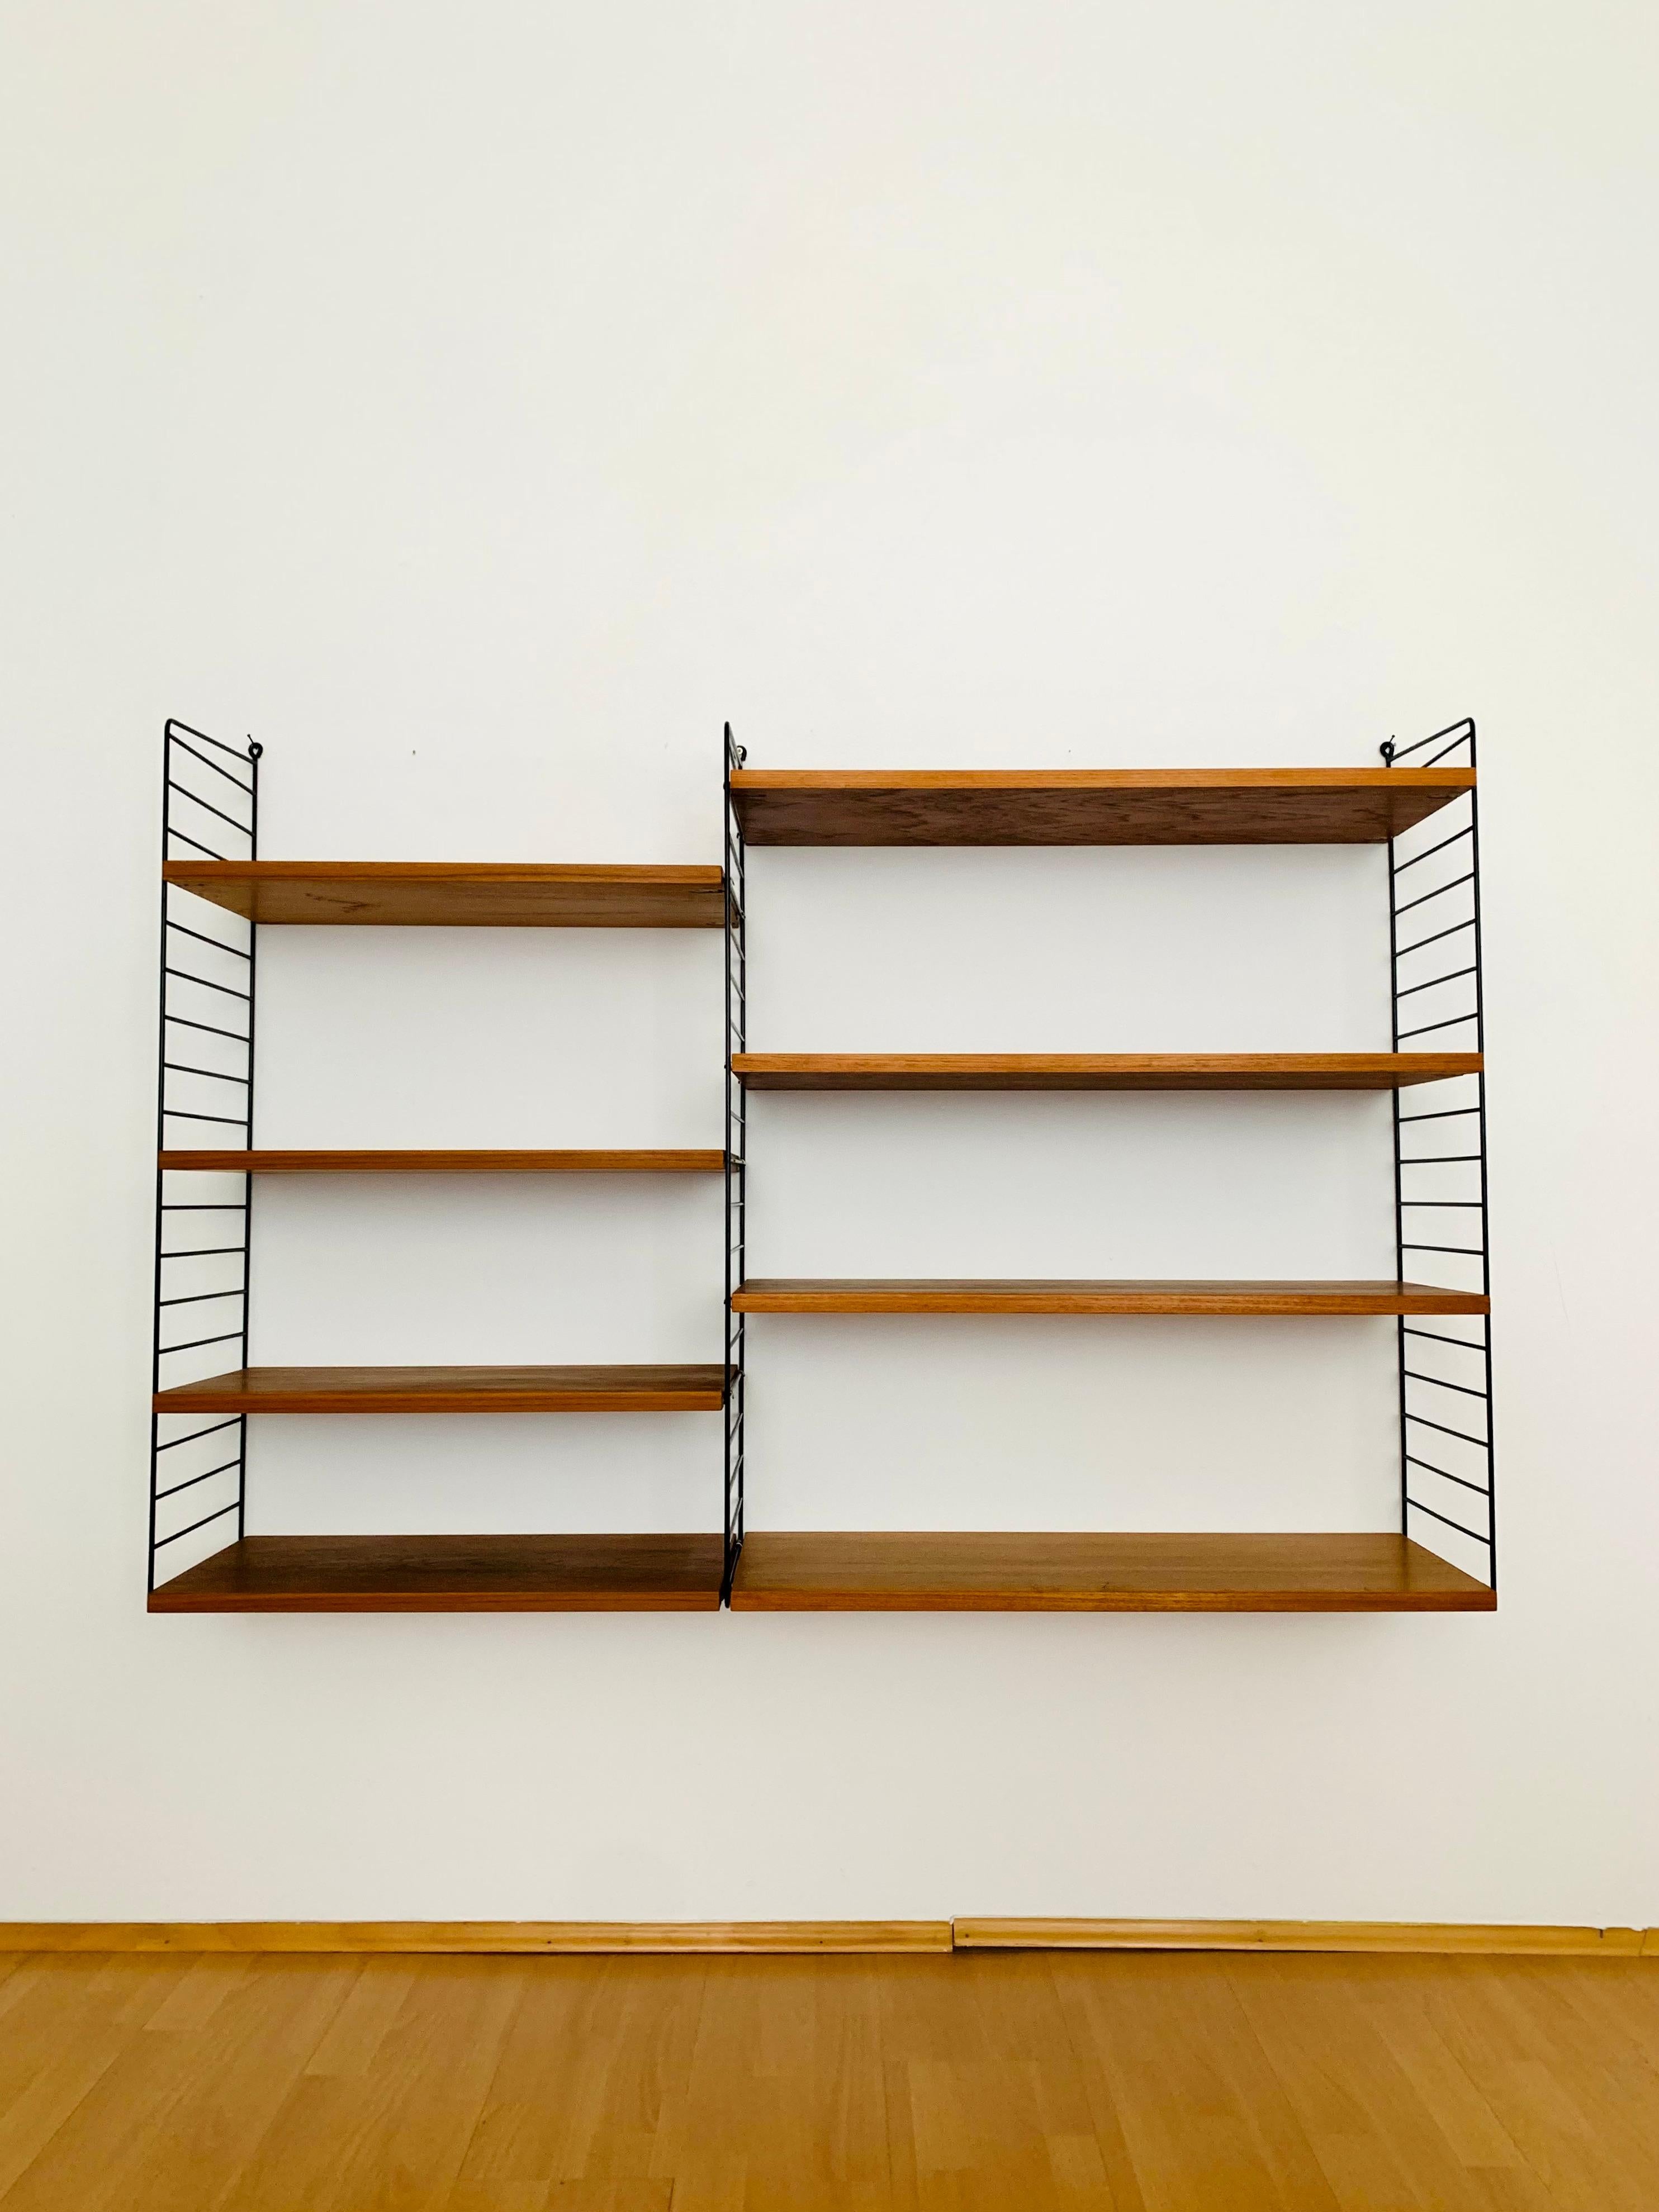 Nice teak shelf from the 1950s.
Wonderful high -quality workmanship and an absolute favorite.
Flexible configurable.

Design: Kajsa & Nils Nisse Strinning
Manufacturer: String Design

Condition:

Very good vintage condition with slight signs of